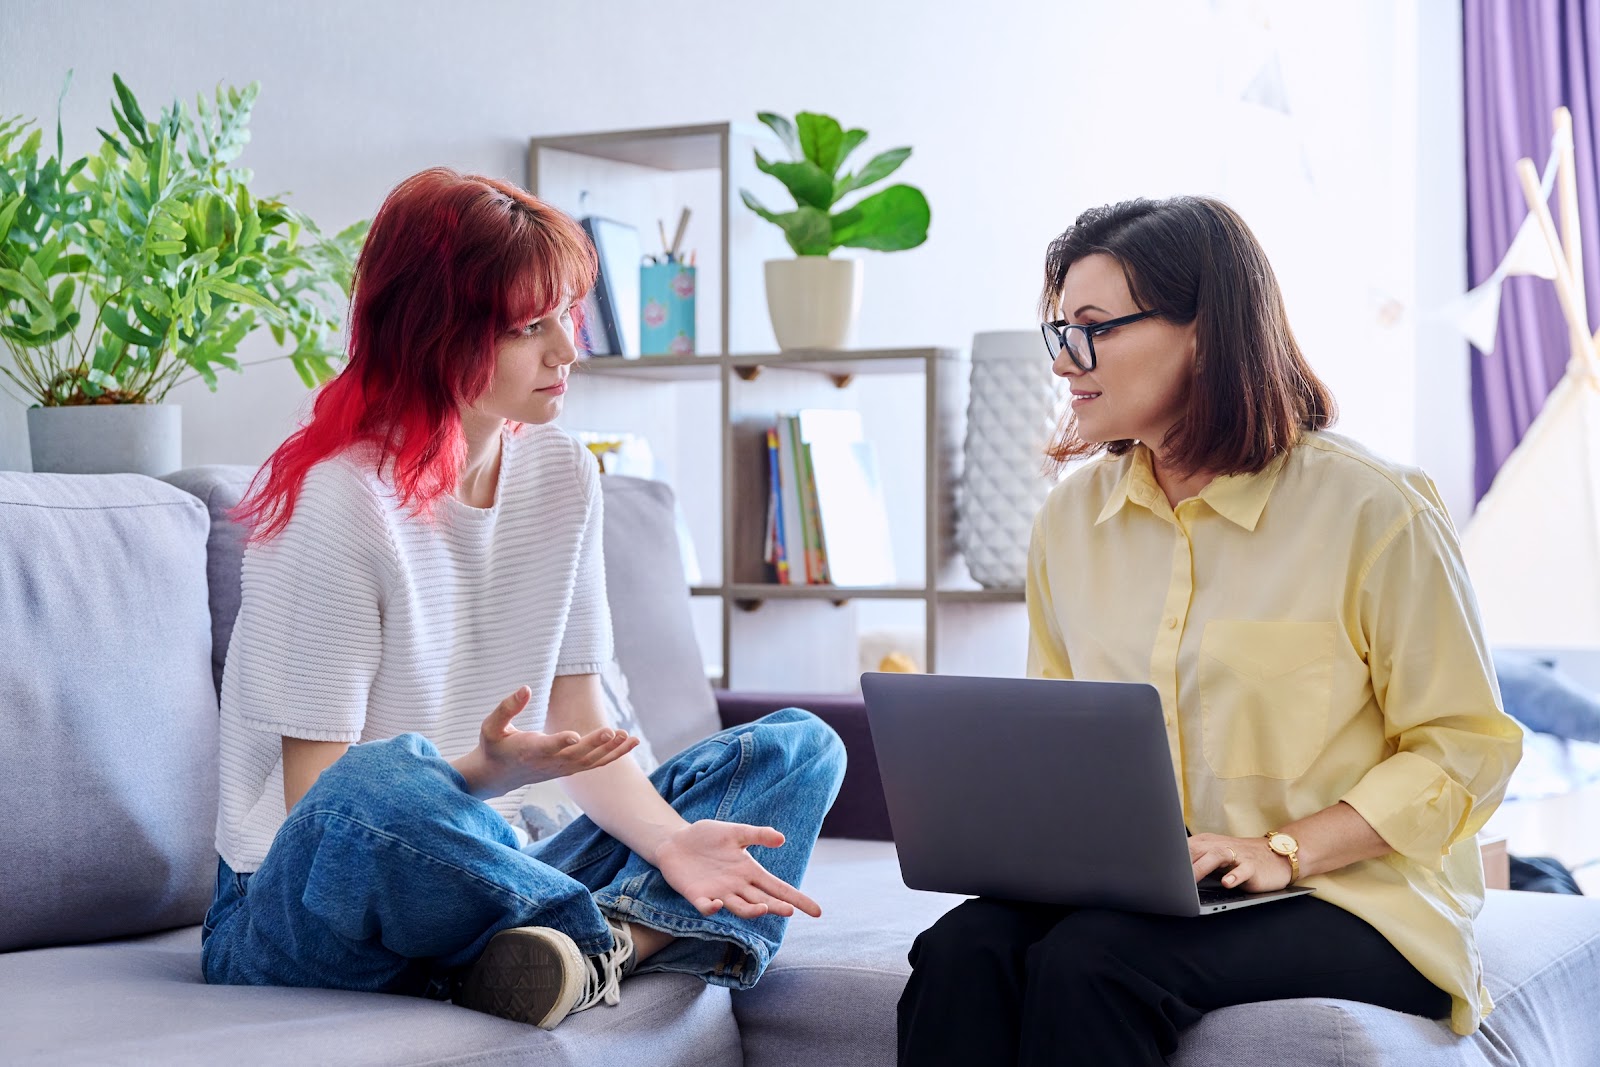 How to know if a therapist is right for you comes down to asking the right questions and knowing if you feel comfortable. In this image, a young woman sits cross-legged on a couch across from a therapist with a laptop. The girl's palms are facing up, as if she's telling a story.